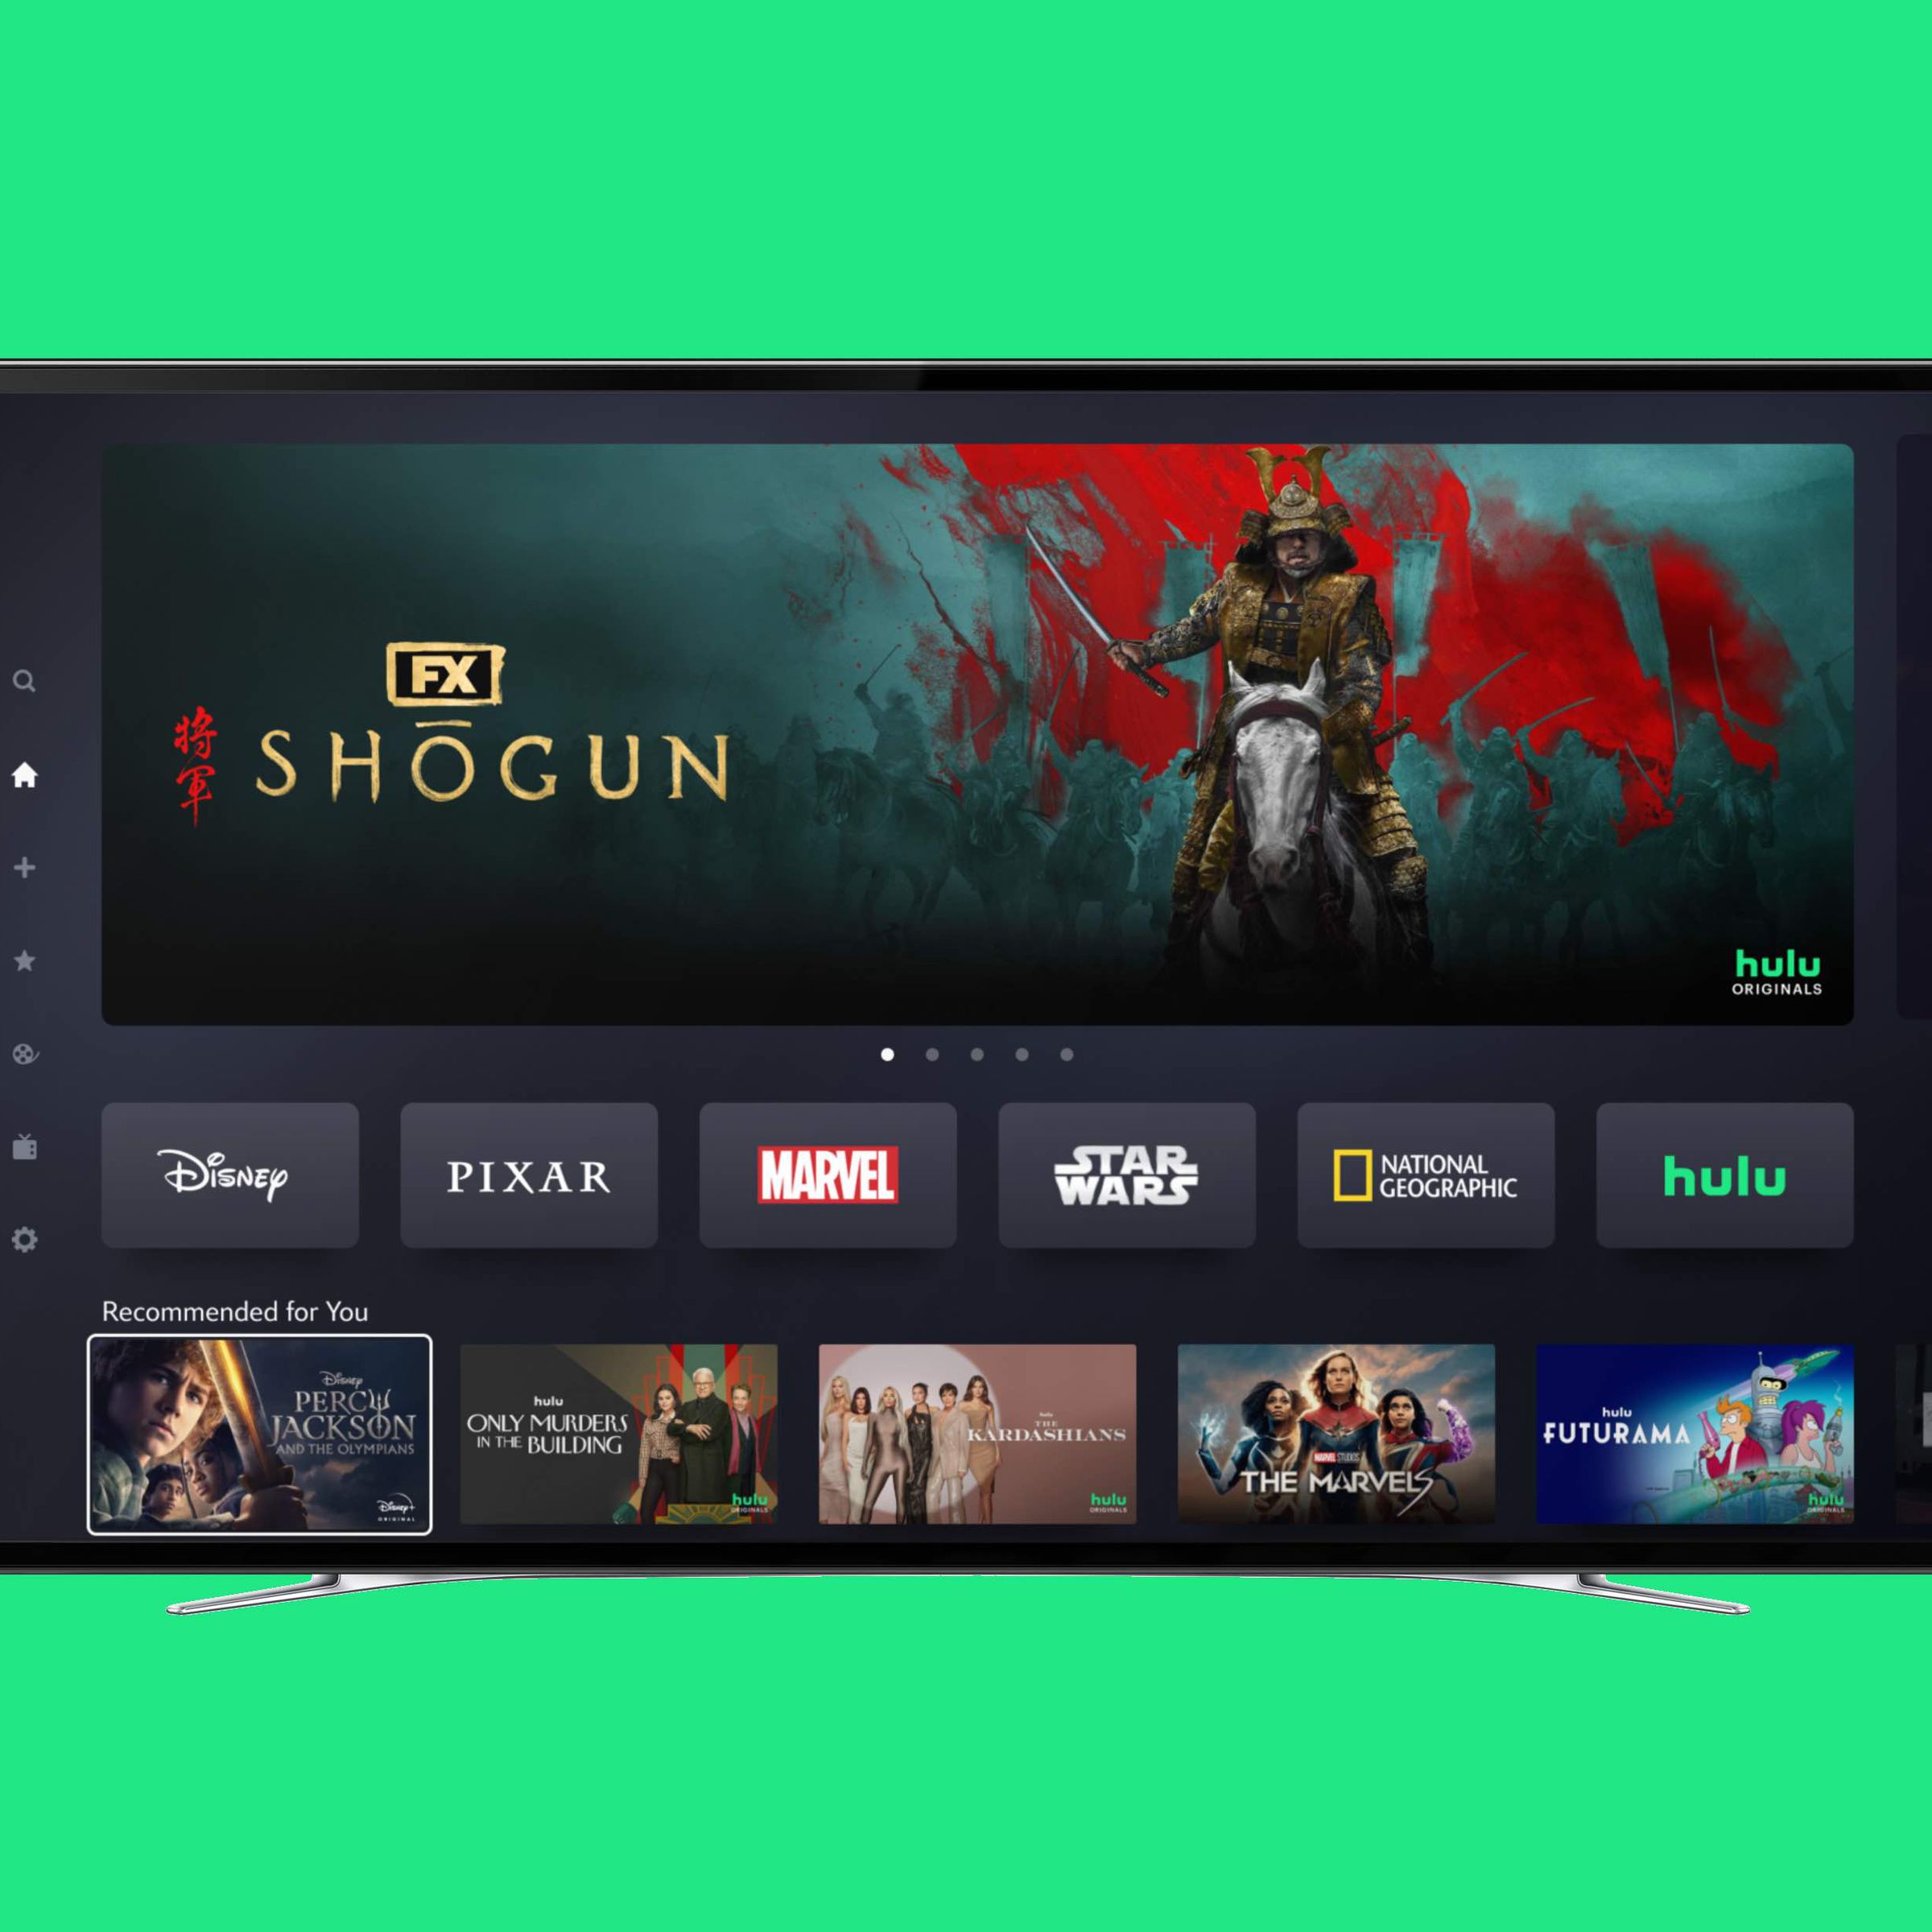 A screenshot of Disney Plus on a TV, showing the Hulu tile.